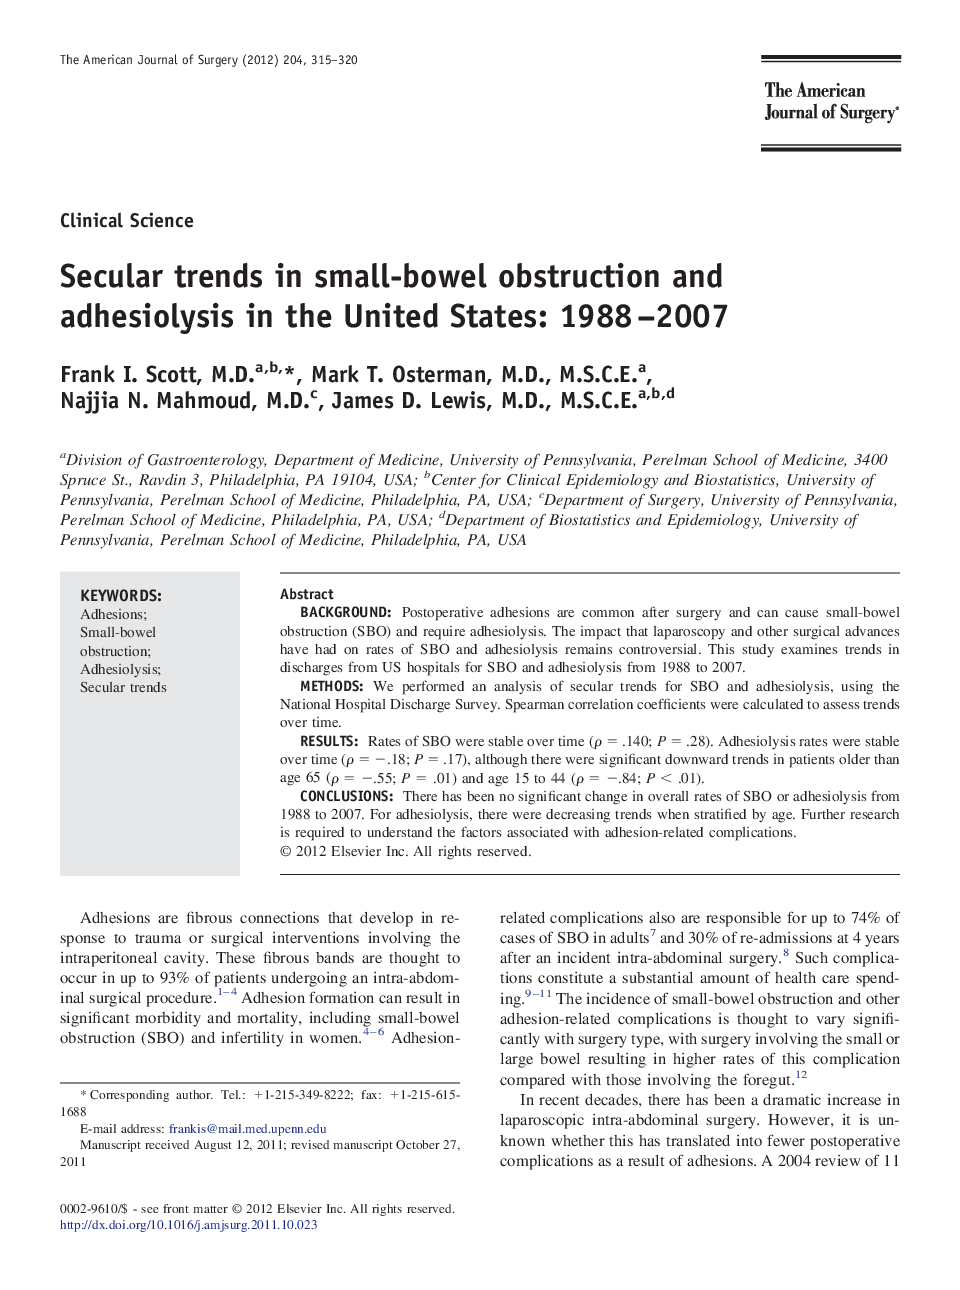 Secular trends in small-bowel obstruction and adhesiolysis in the United States: 1988–2007